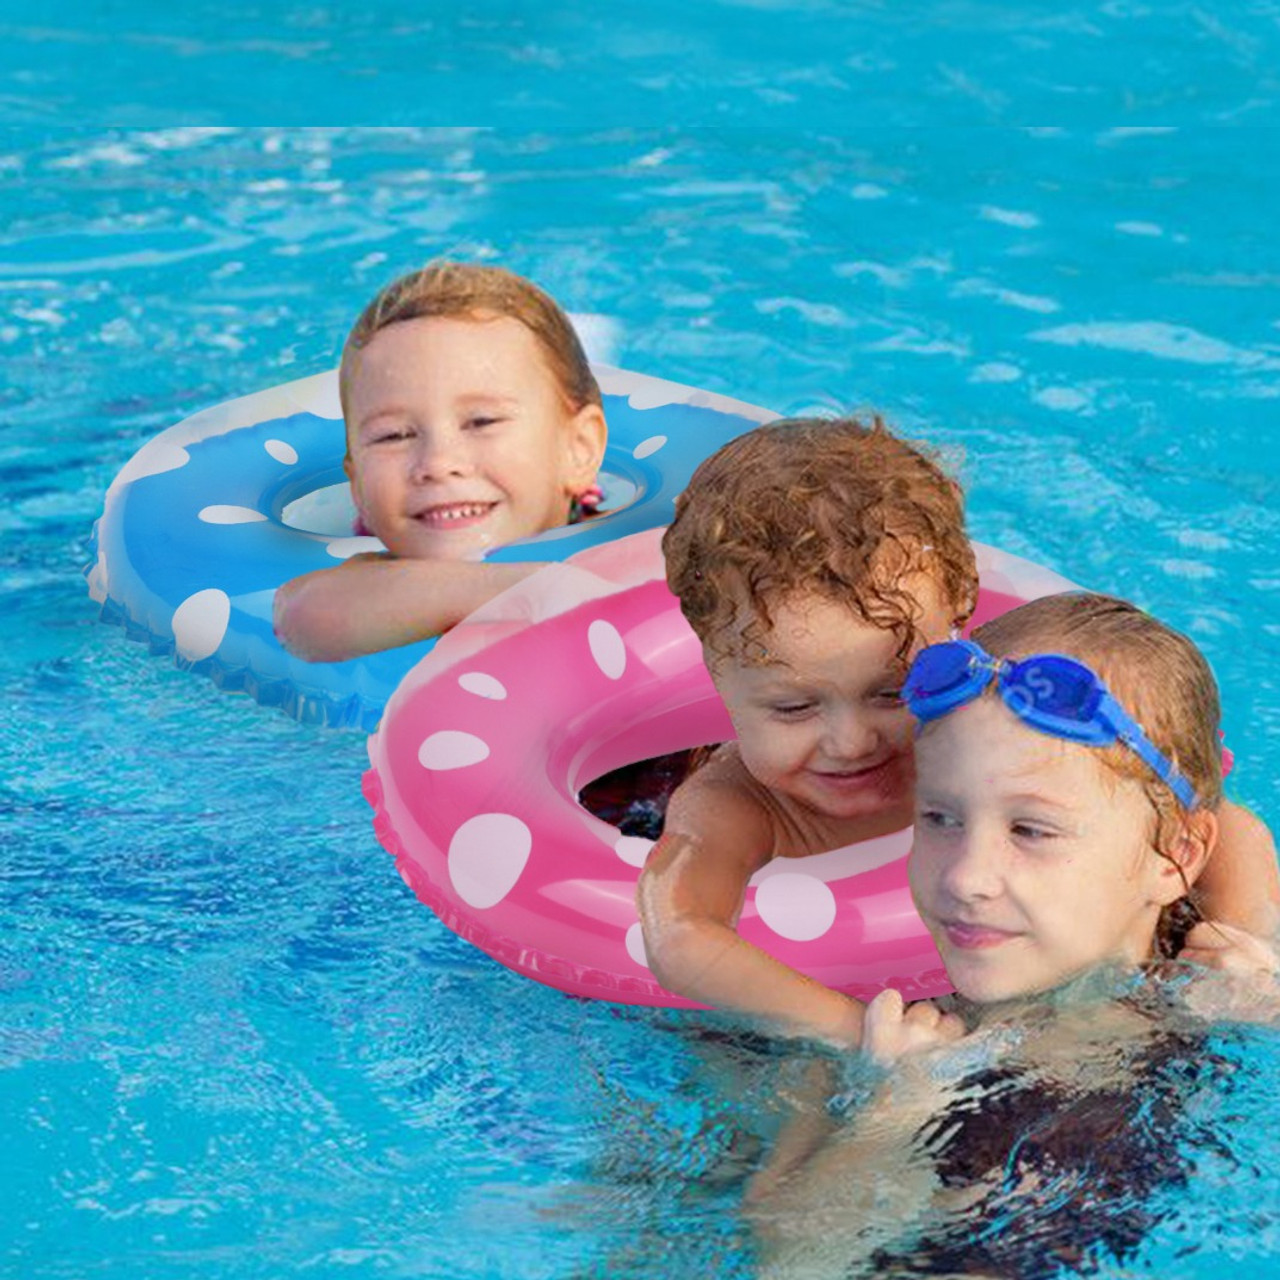 90cm NOVELTY DONUT SWIMMING INFLATABLE RUBBER SWIM RING HOLIDAY POOL FUN KIDS 